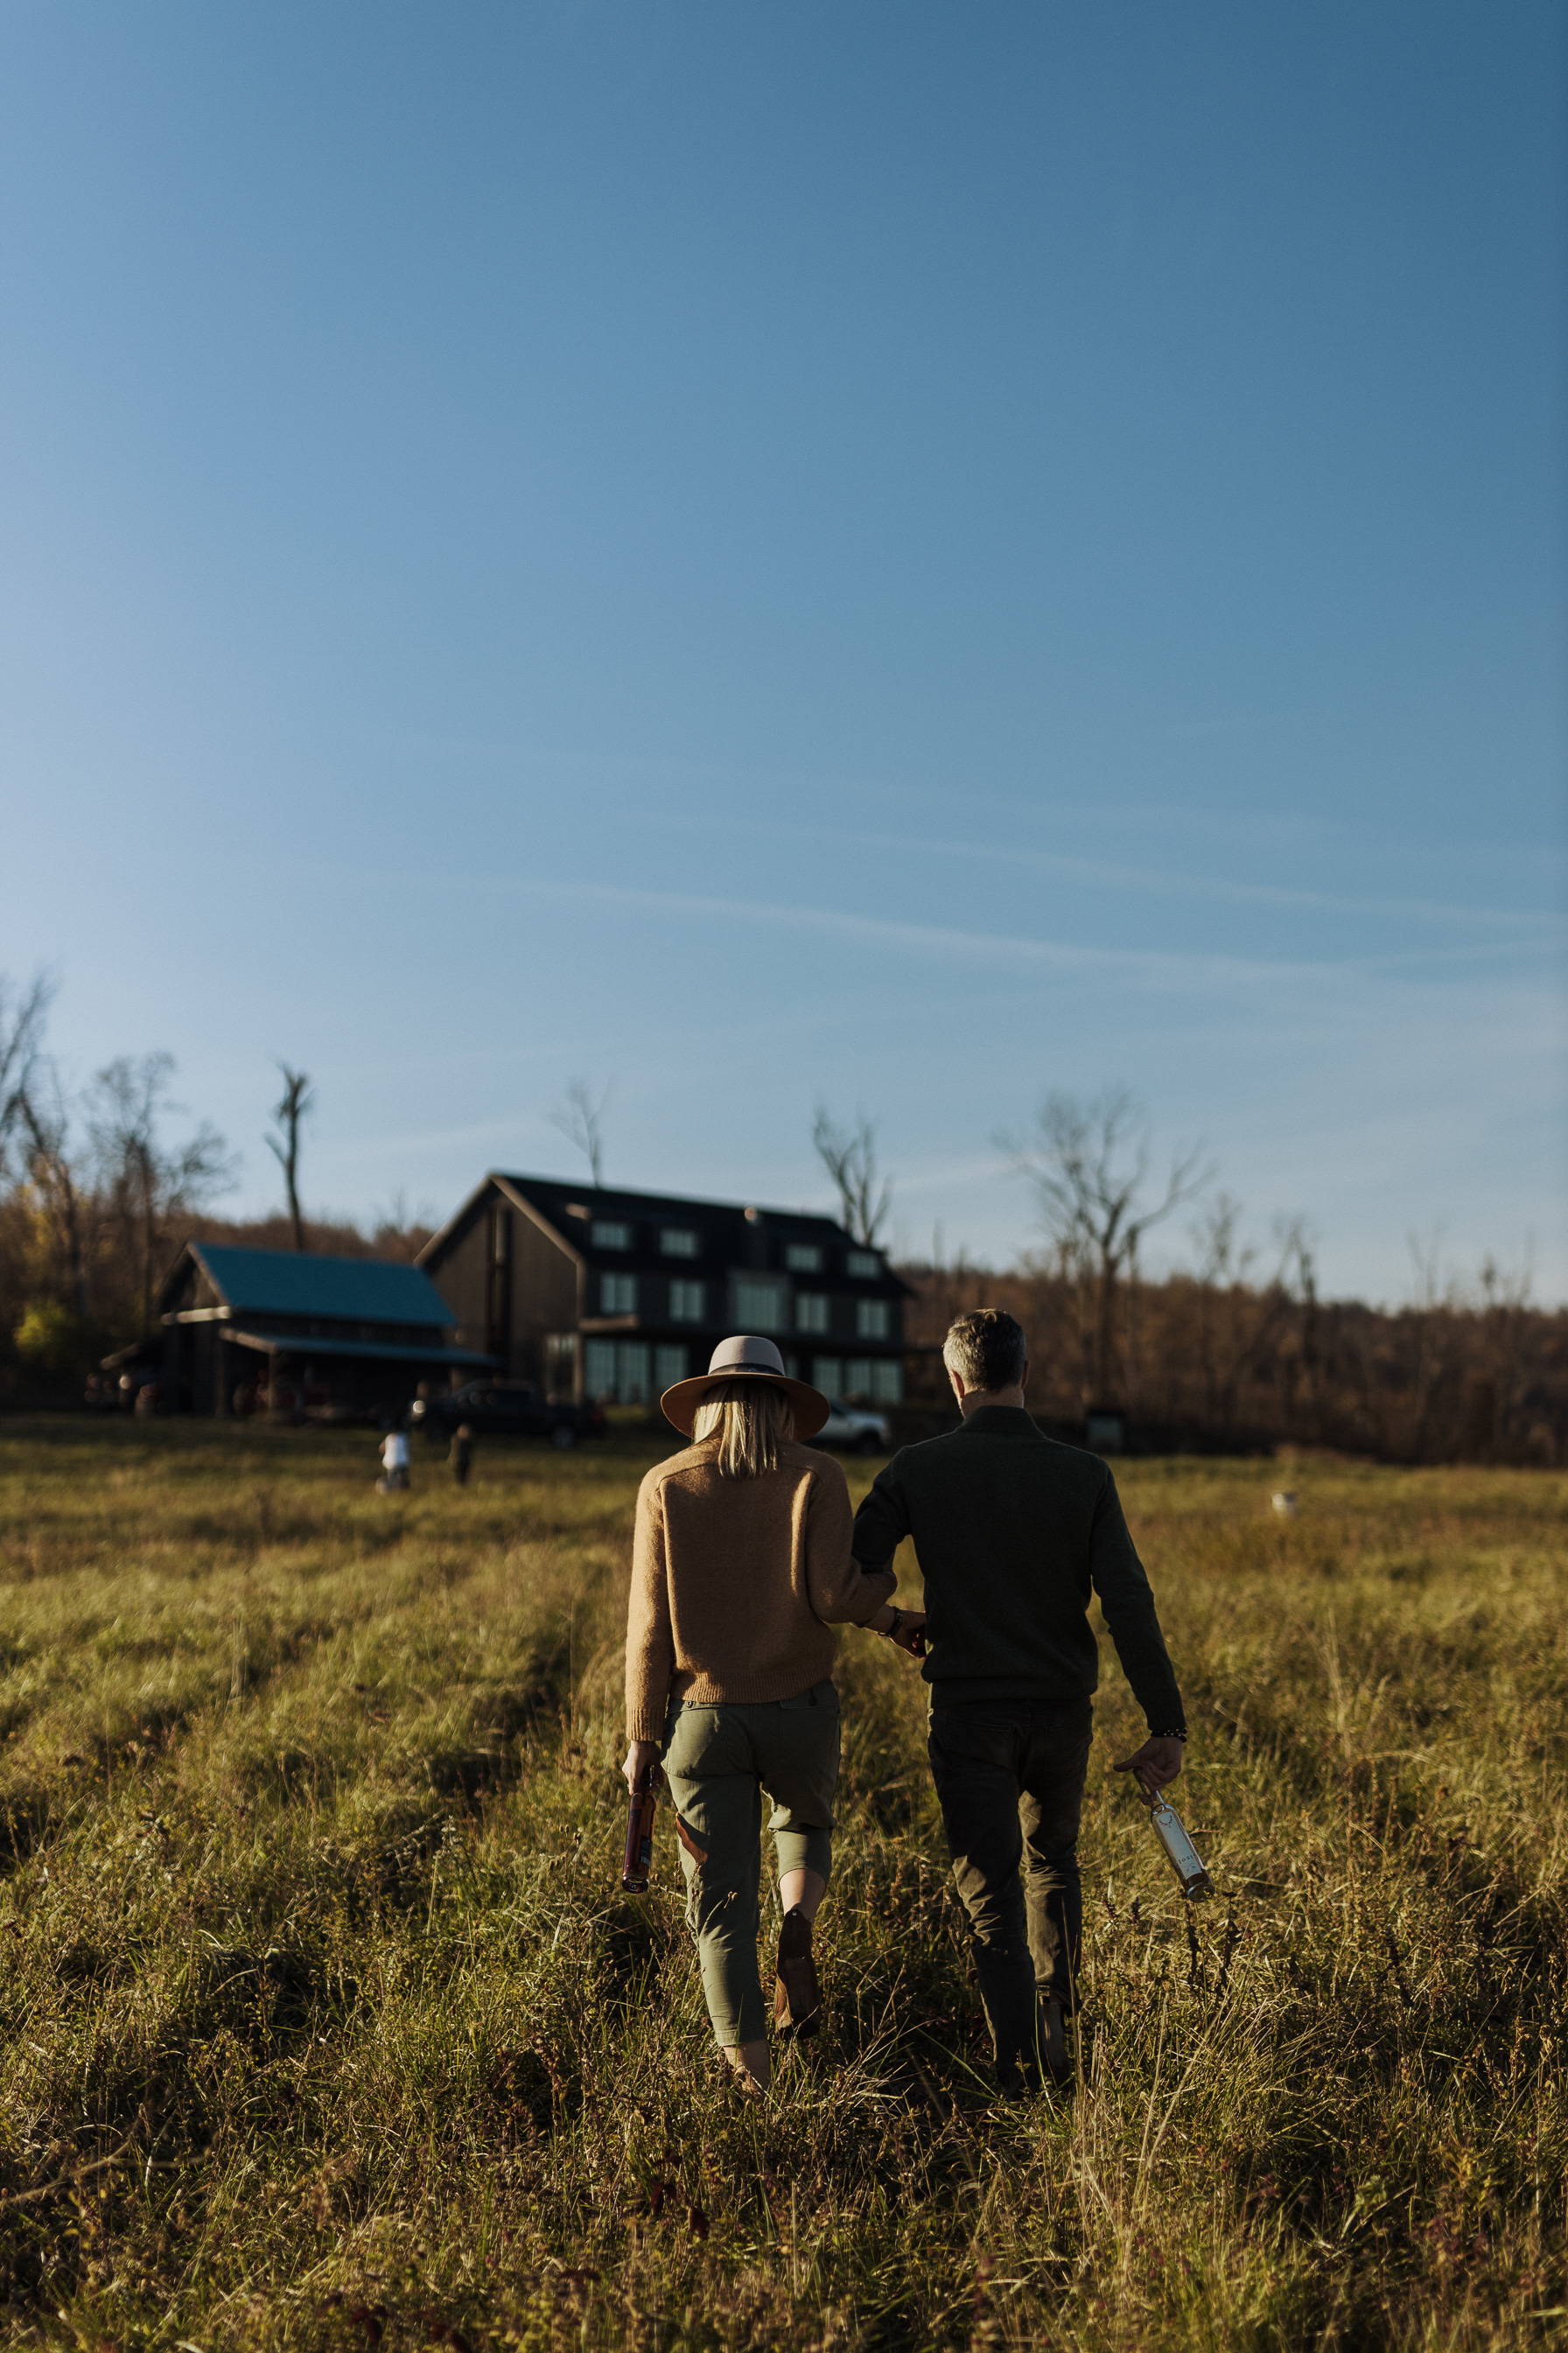 A couple (man and woman) walking towards a large black cabin.